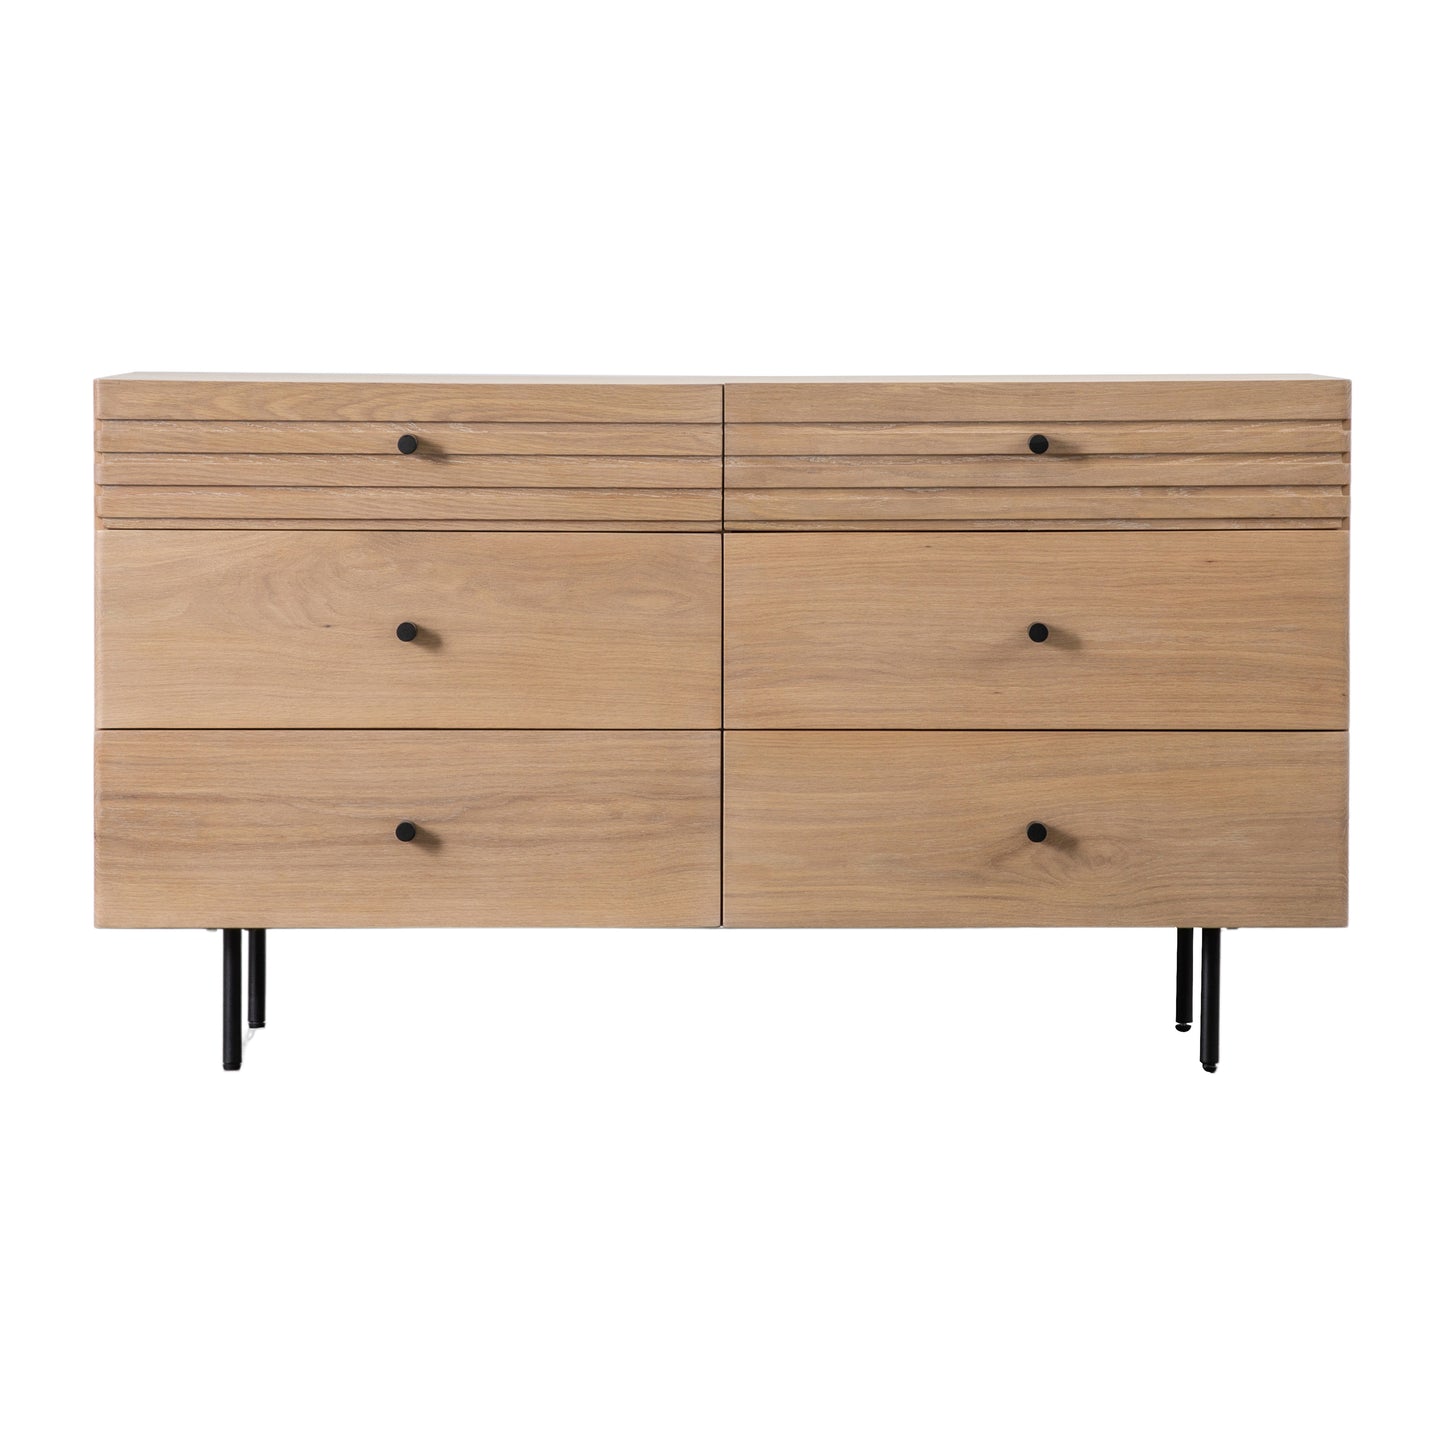 A Tortington 6 Drawer Chest with black legs and drawers, perfect for home furniture and interior decor.